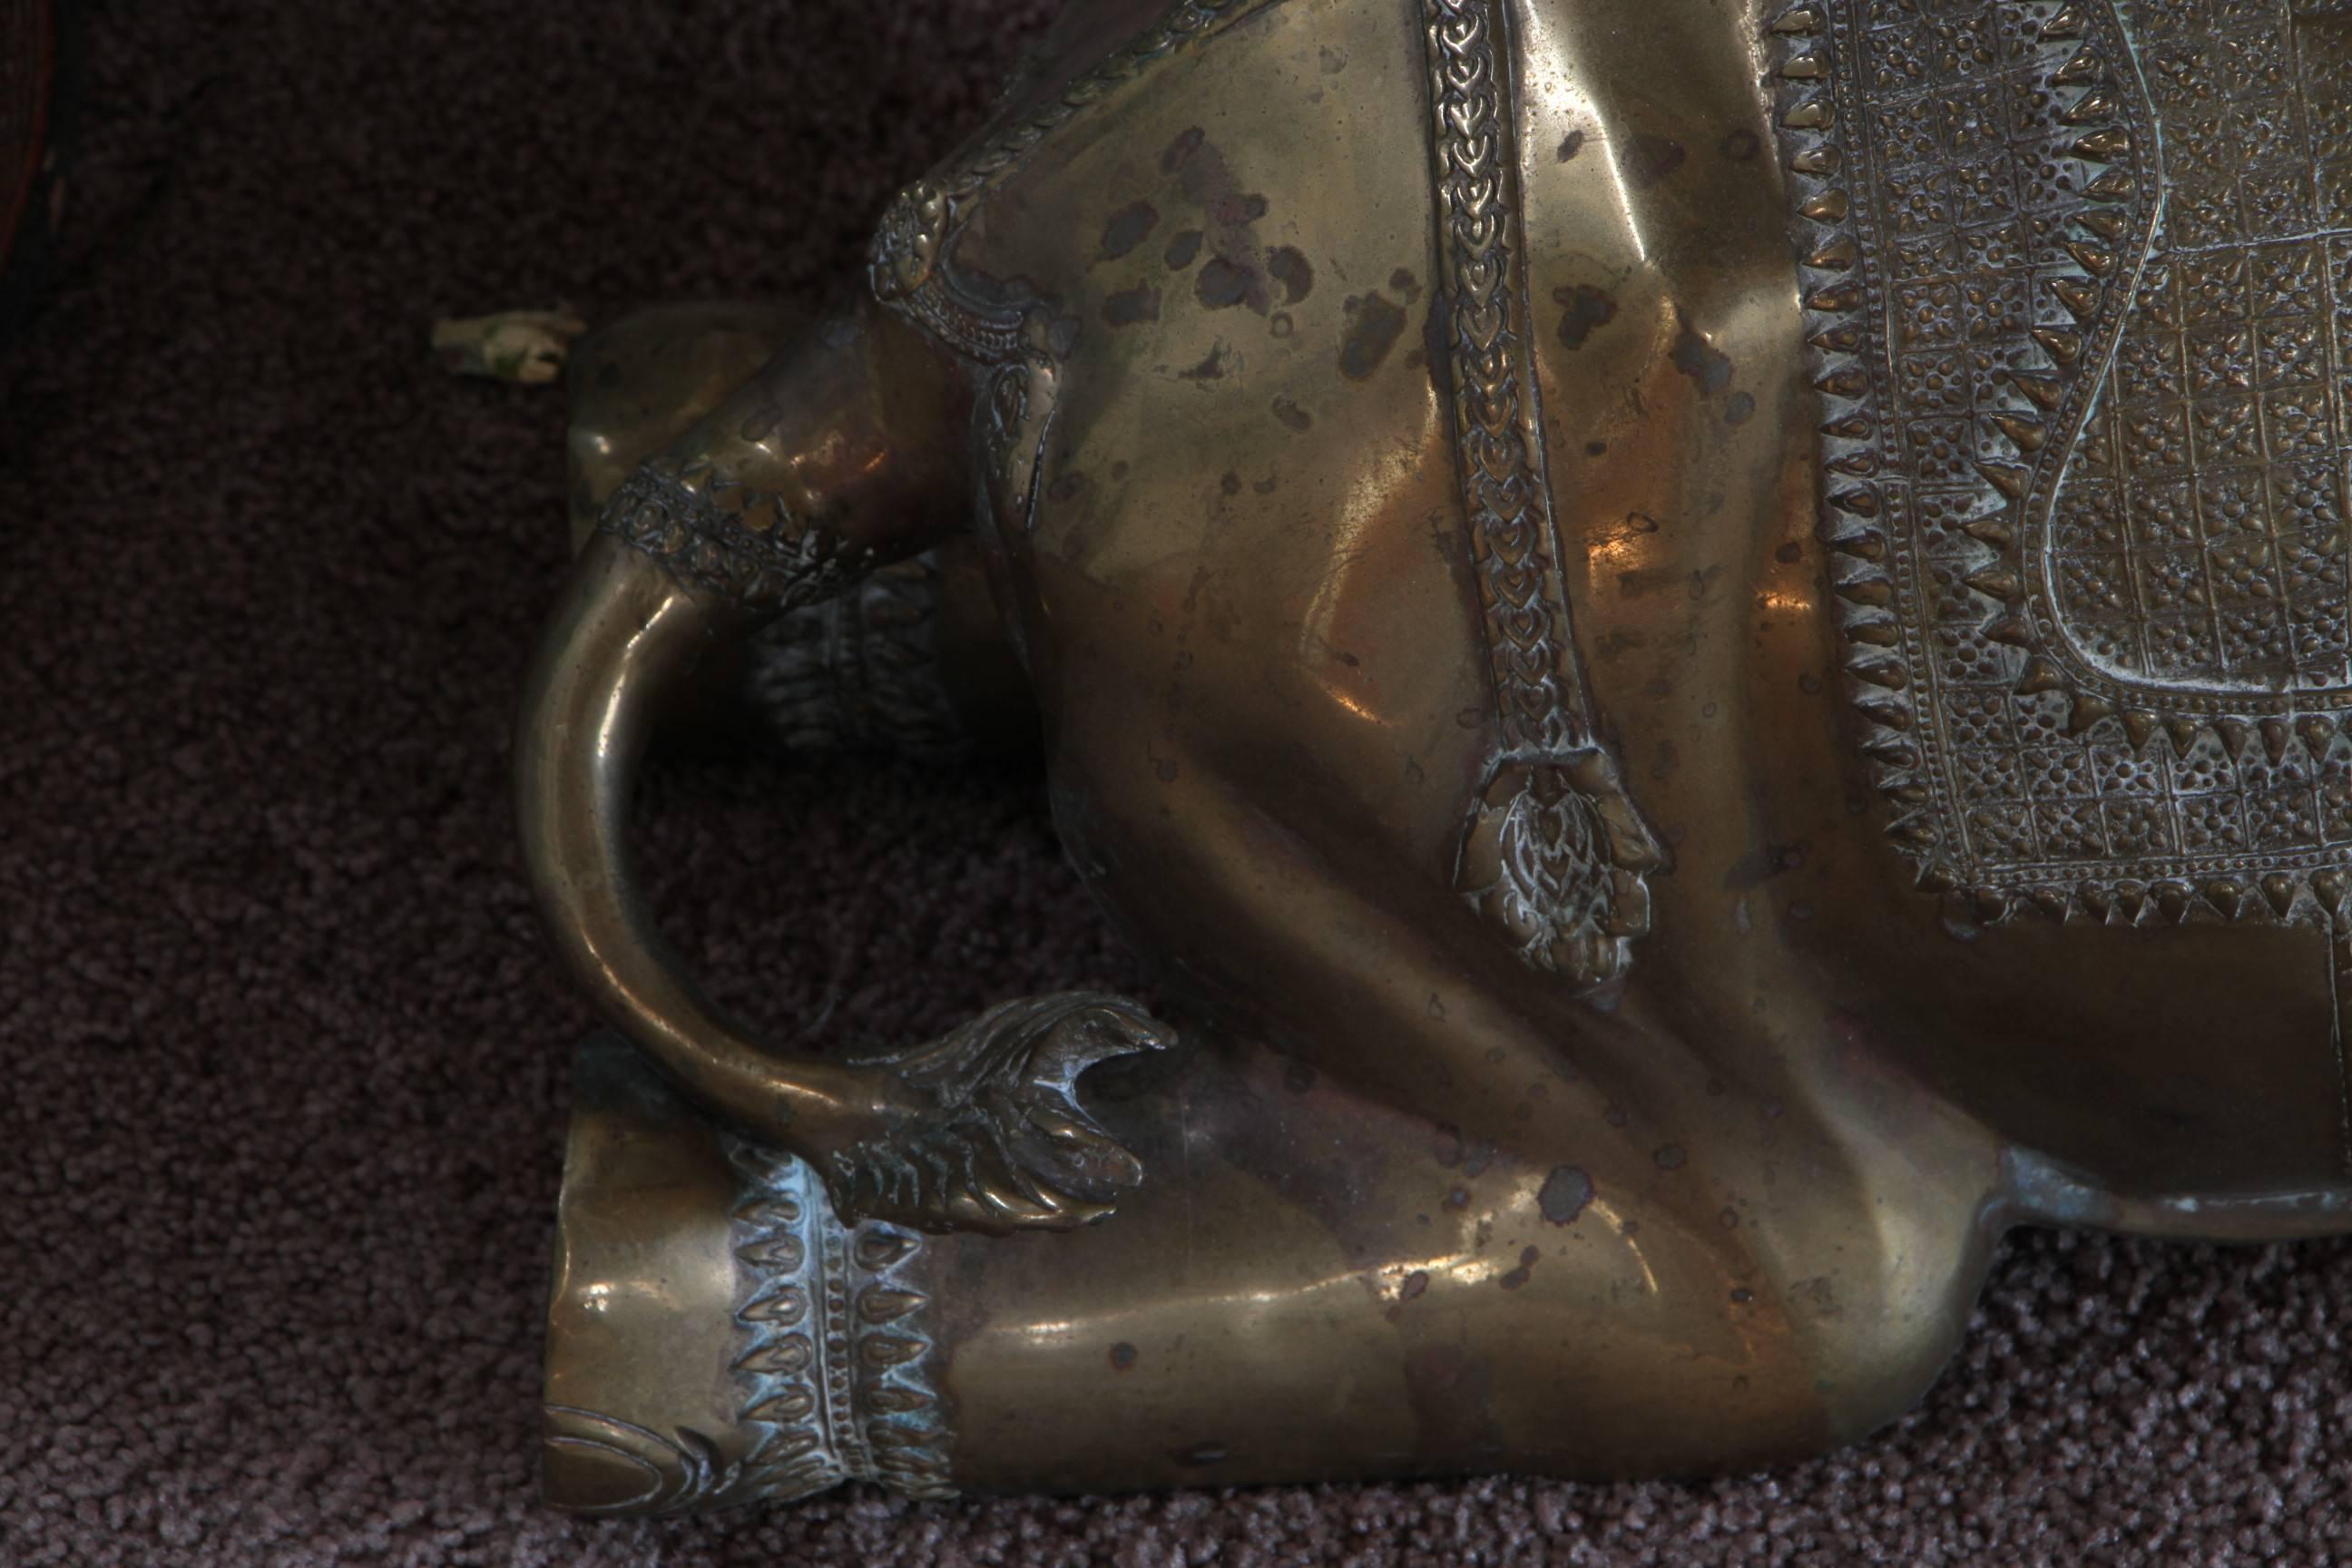 Cast brass elephant sculpture. Very decorative with great form and very good details.